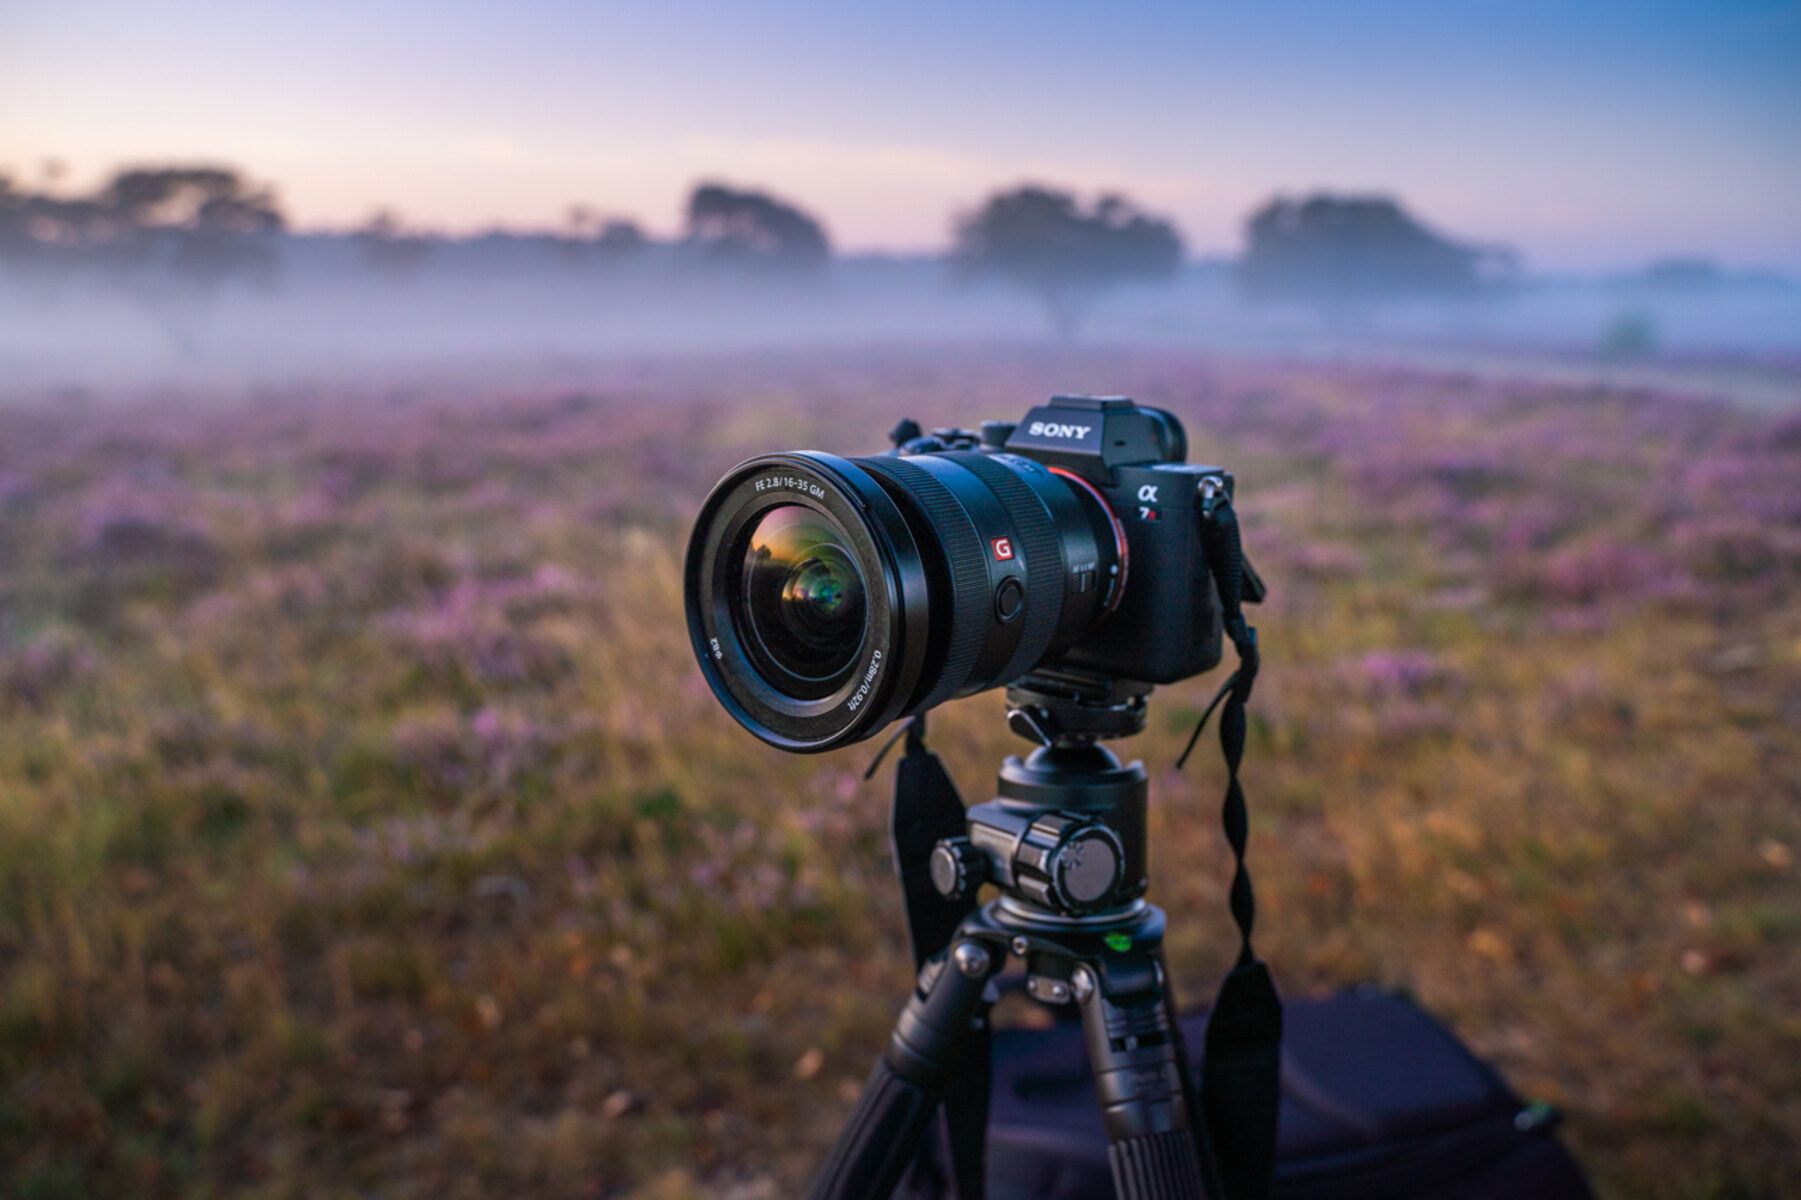 How To Use A Sony Mirrorless Camera For Landscape Photography